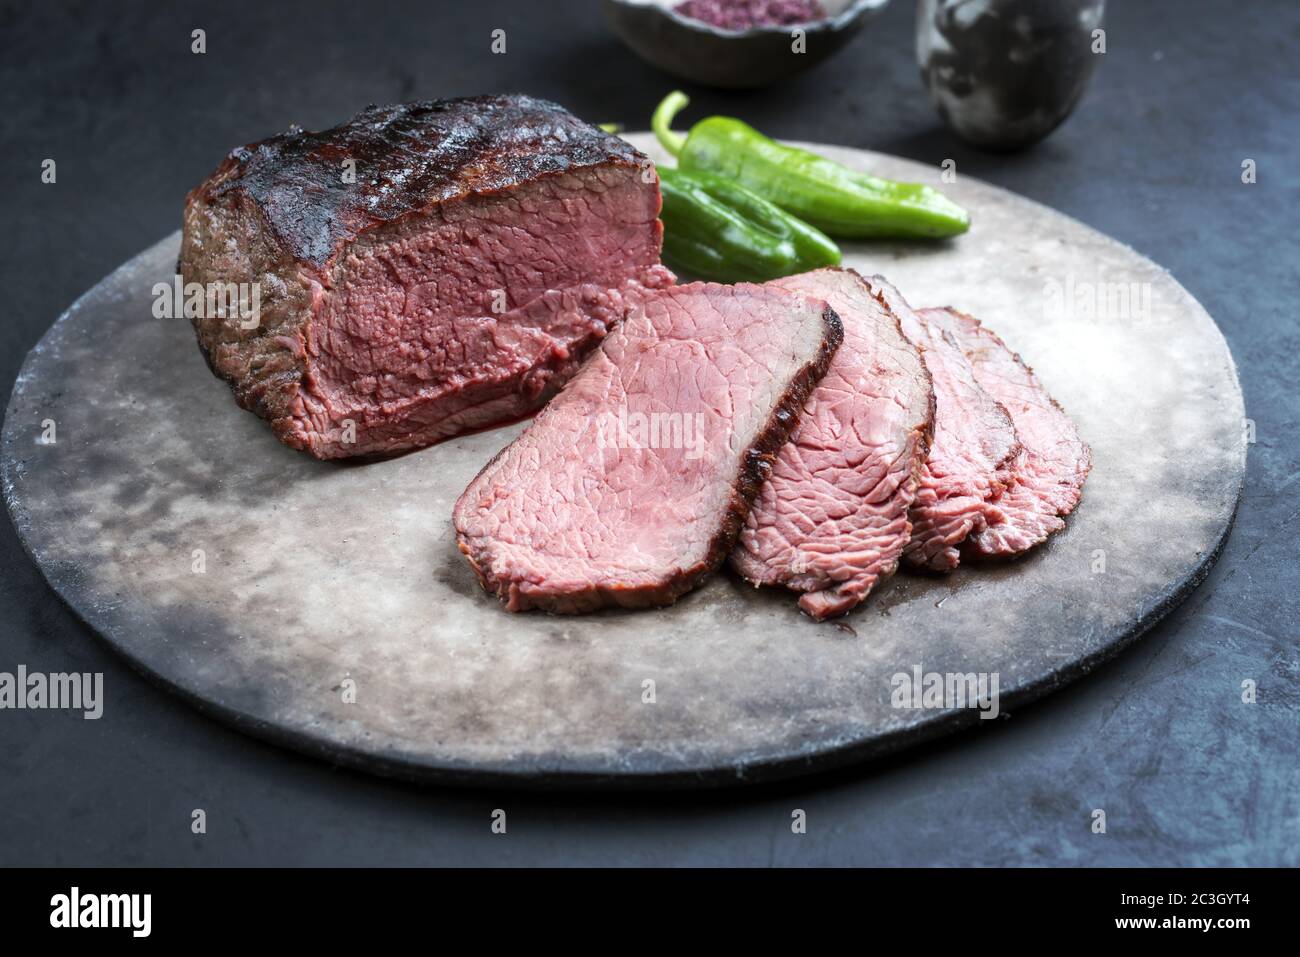 Traditional Commonwealth Sunday roast with sliced cold cuts roast beef with chili and red salt as closeup on a modern design pla Stock Photo